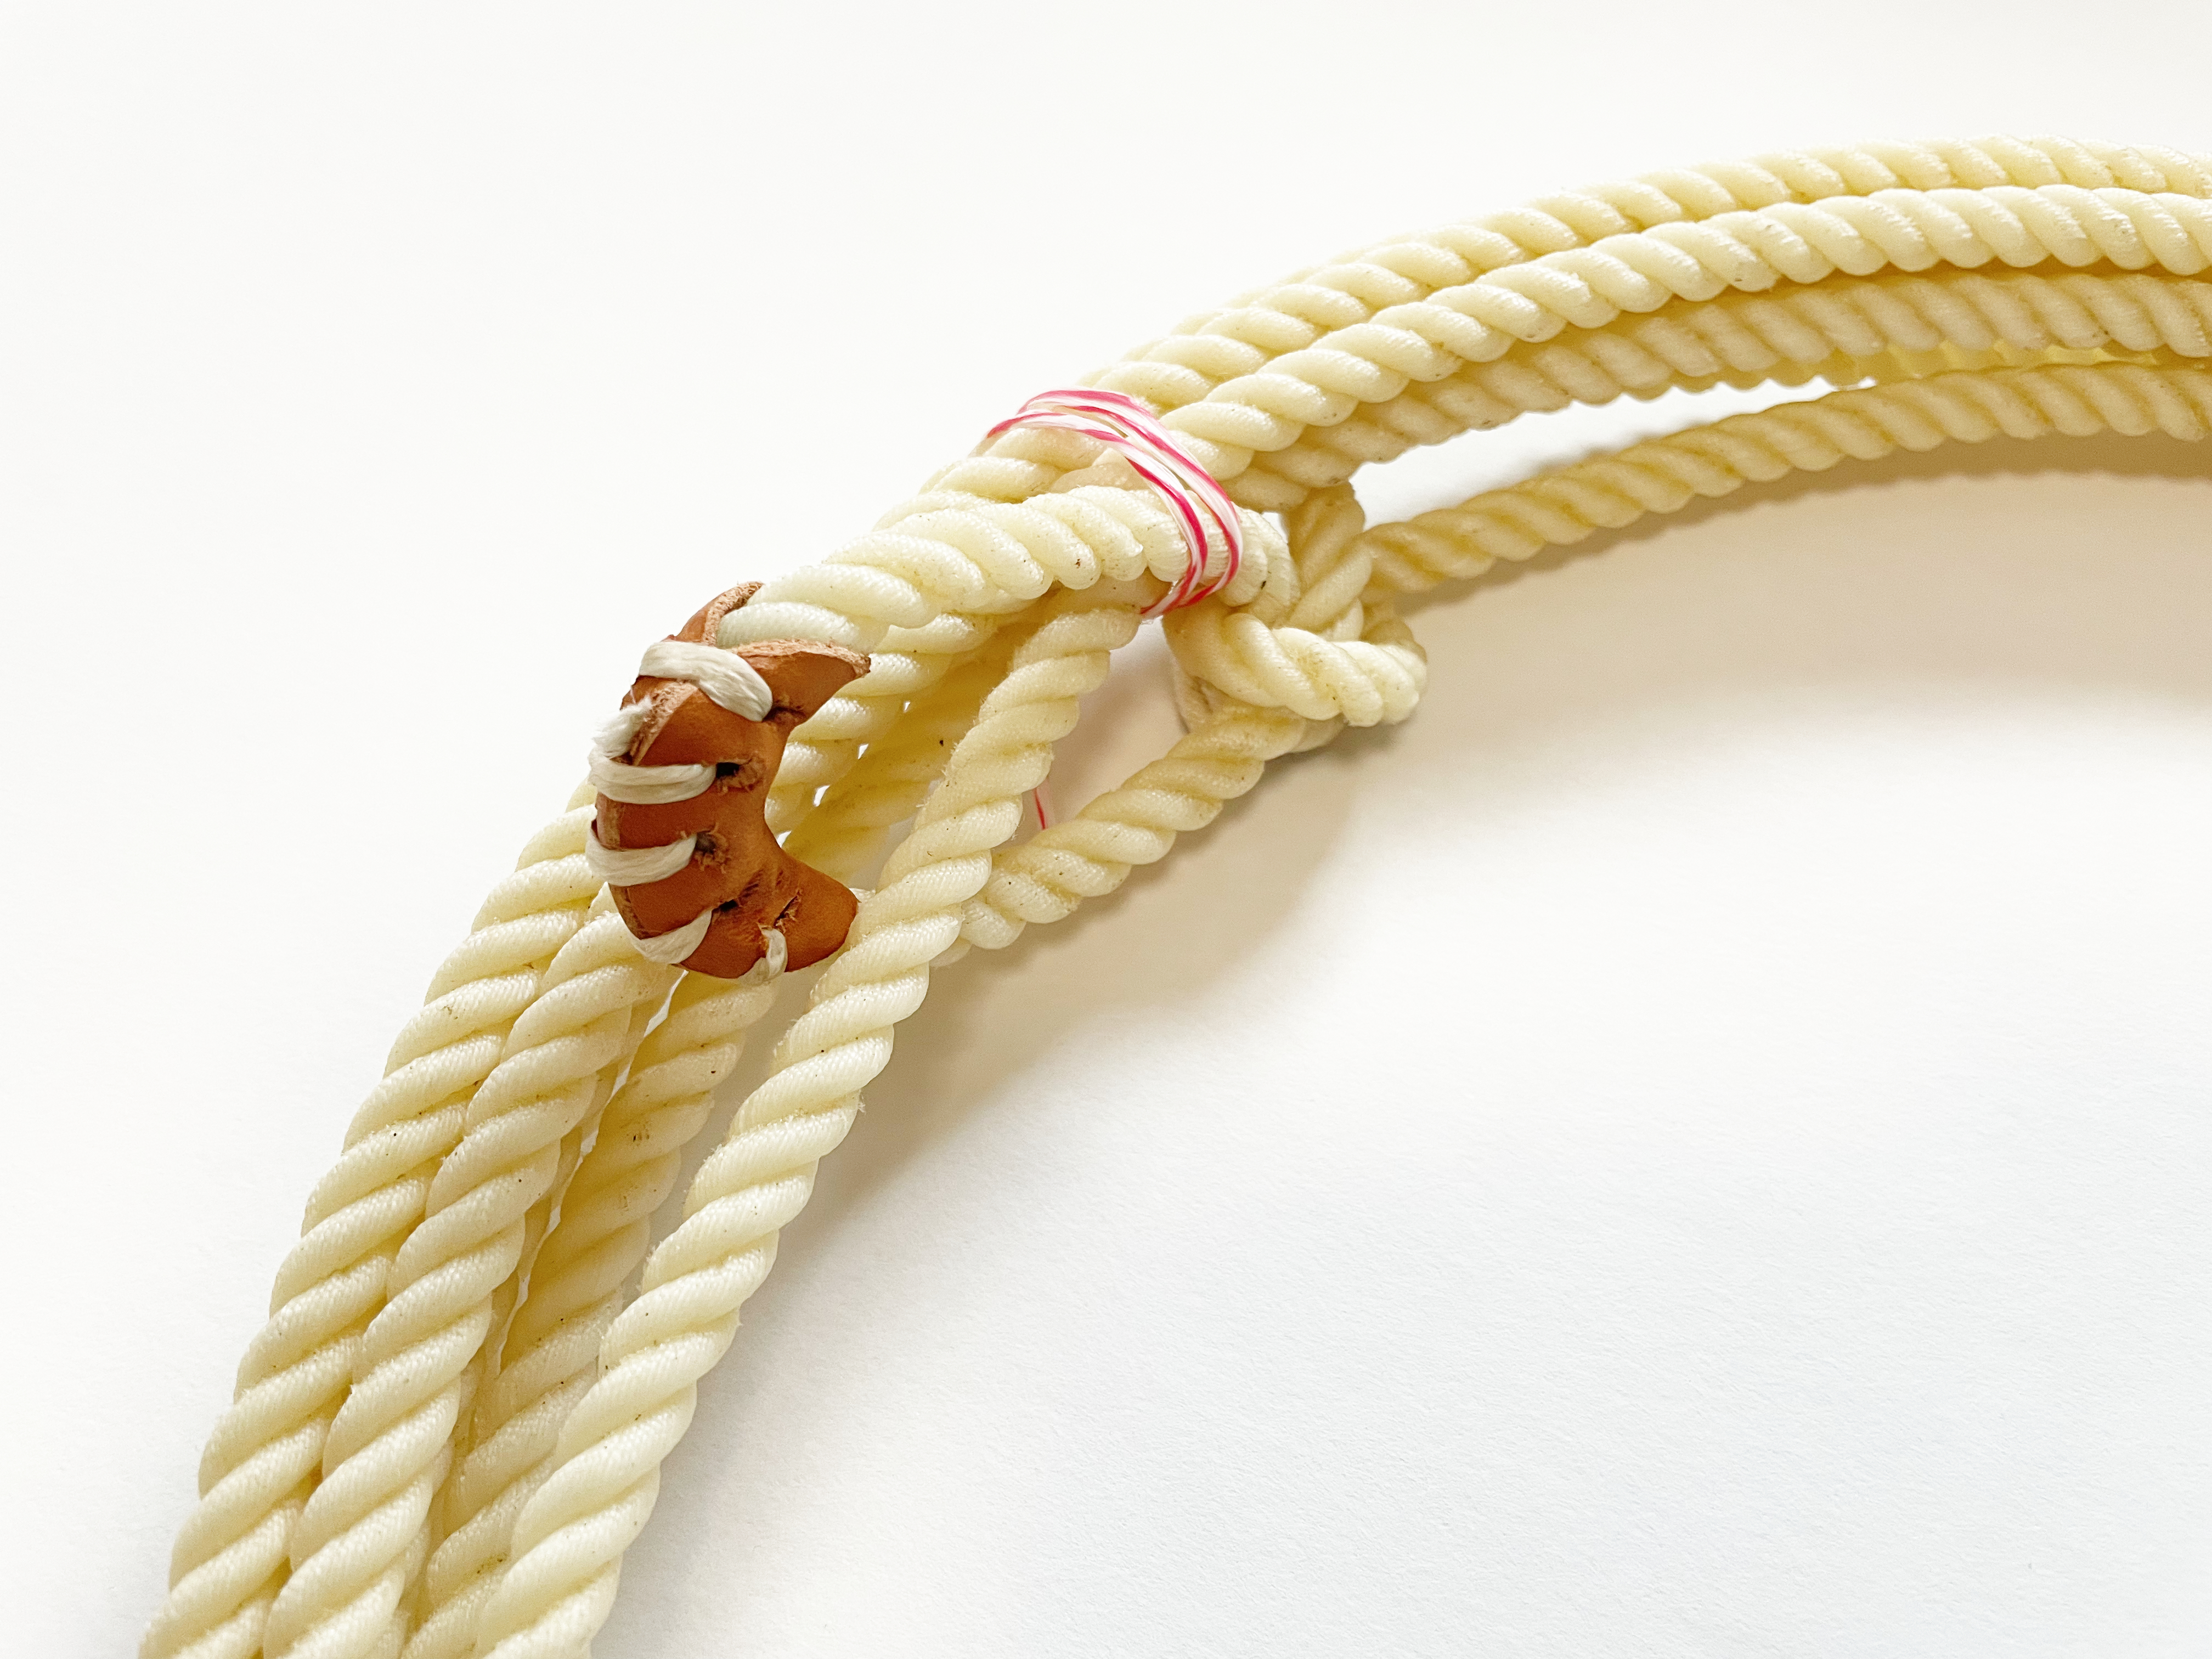 WAXED LASSO MODEL "EXPERT ROPE" SIZE 35"